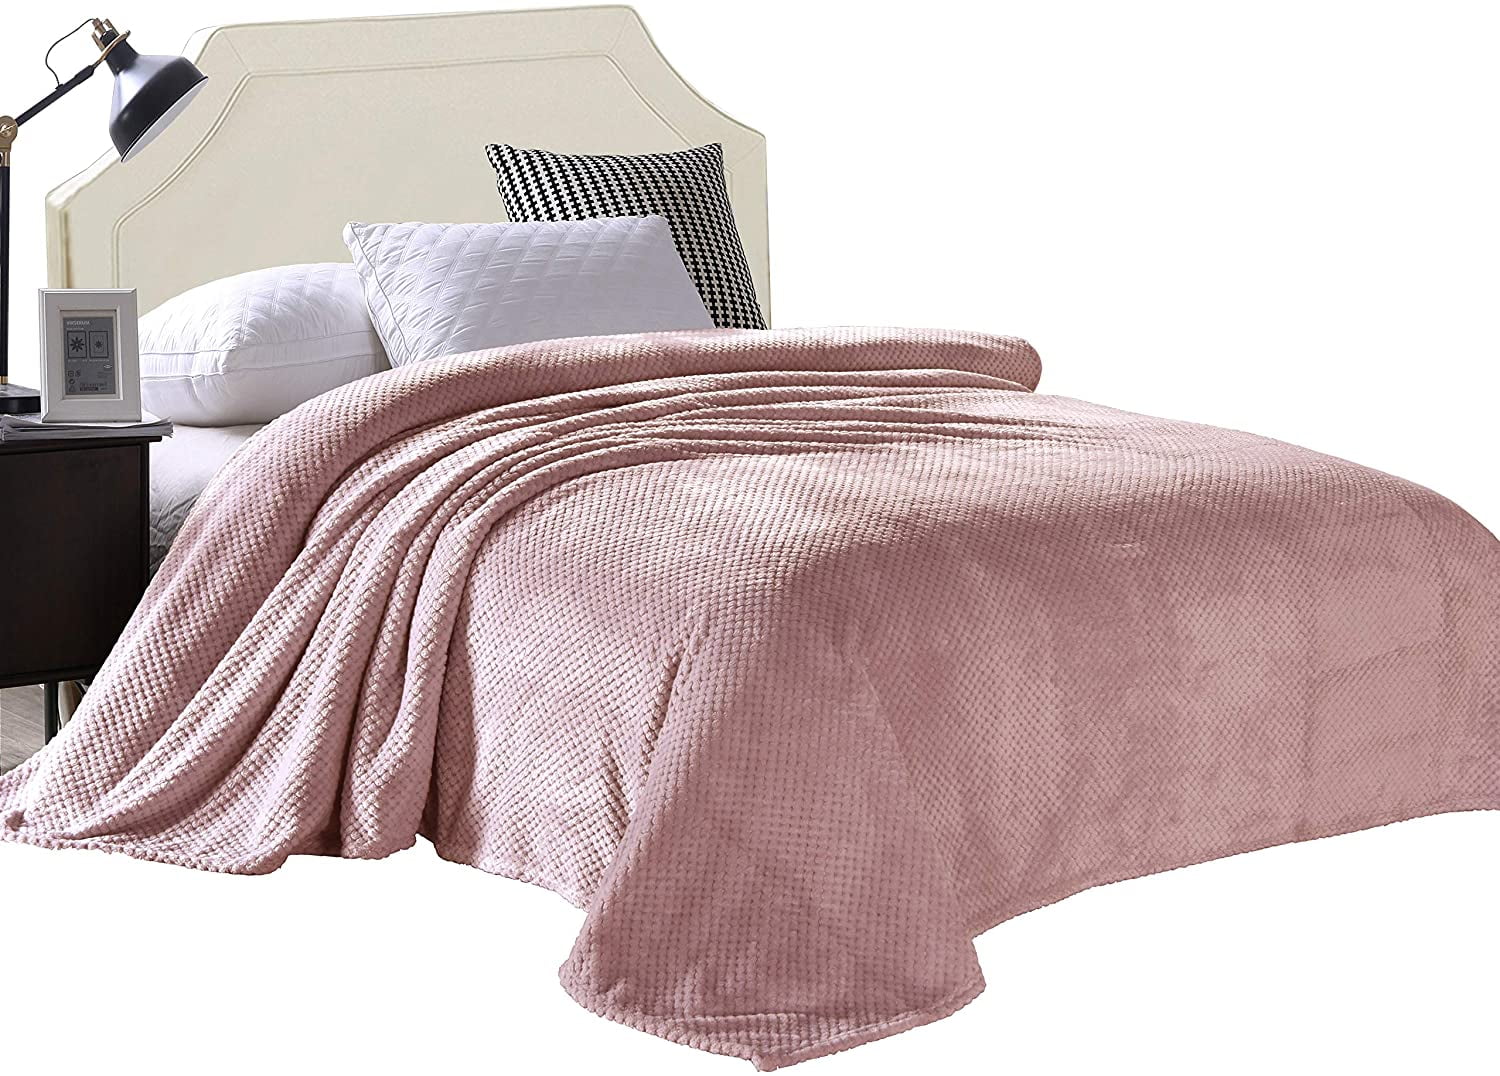 Details about   Travel Blanket Light Soft Bed Sheet Cover Warm Comfy Portable Blankets Wearable 